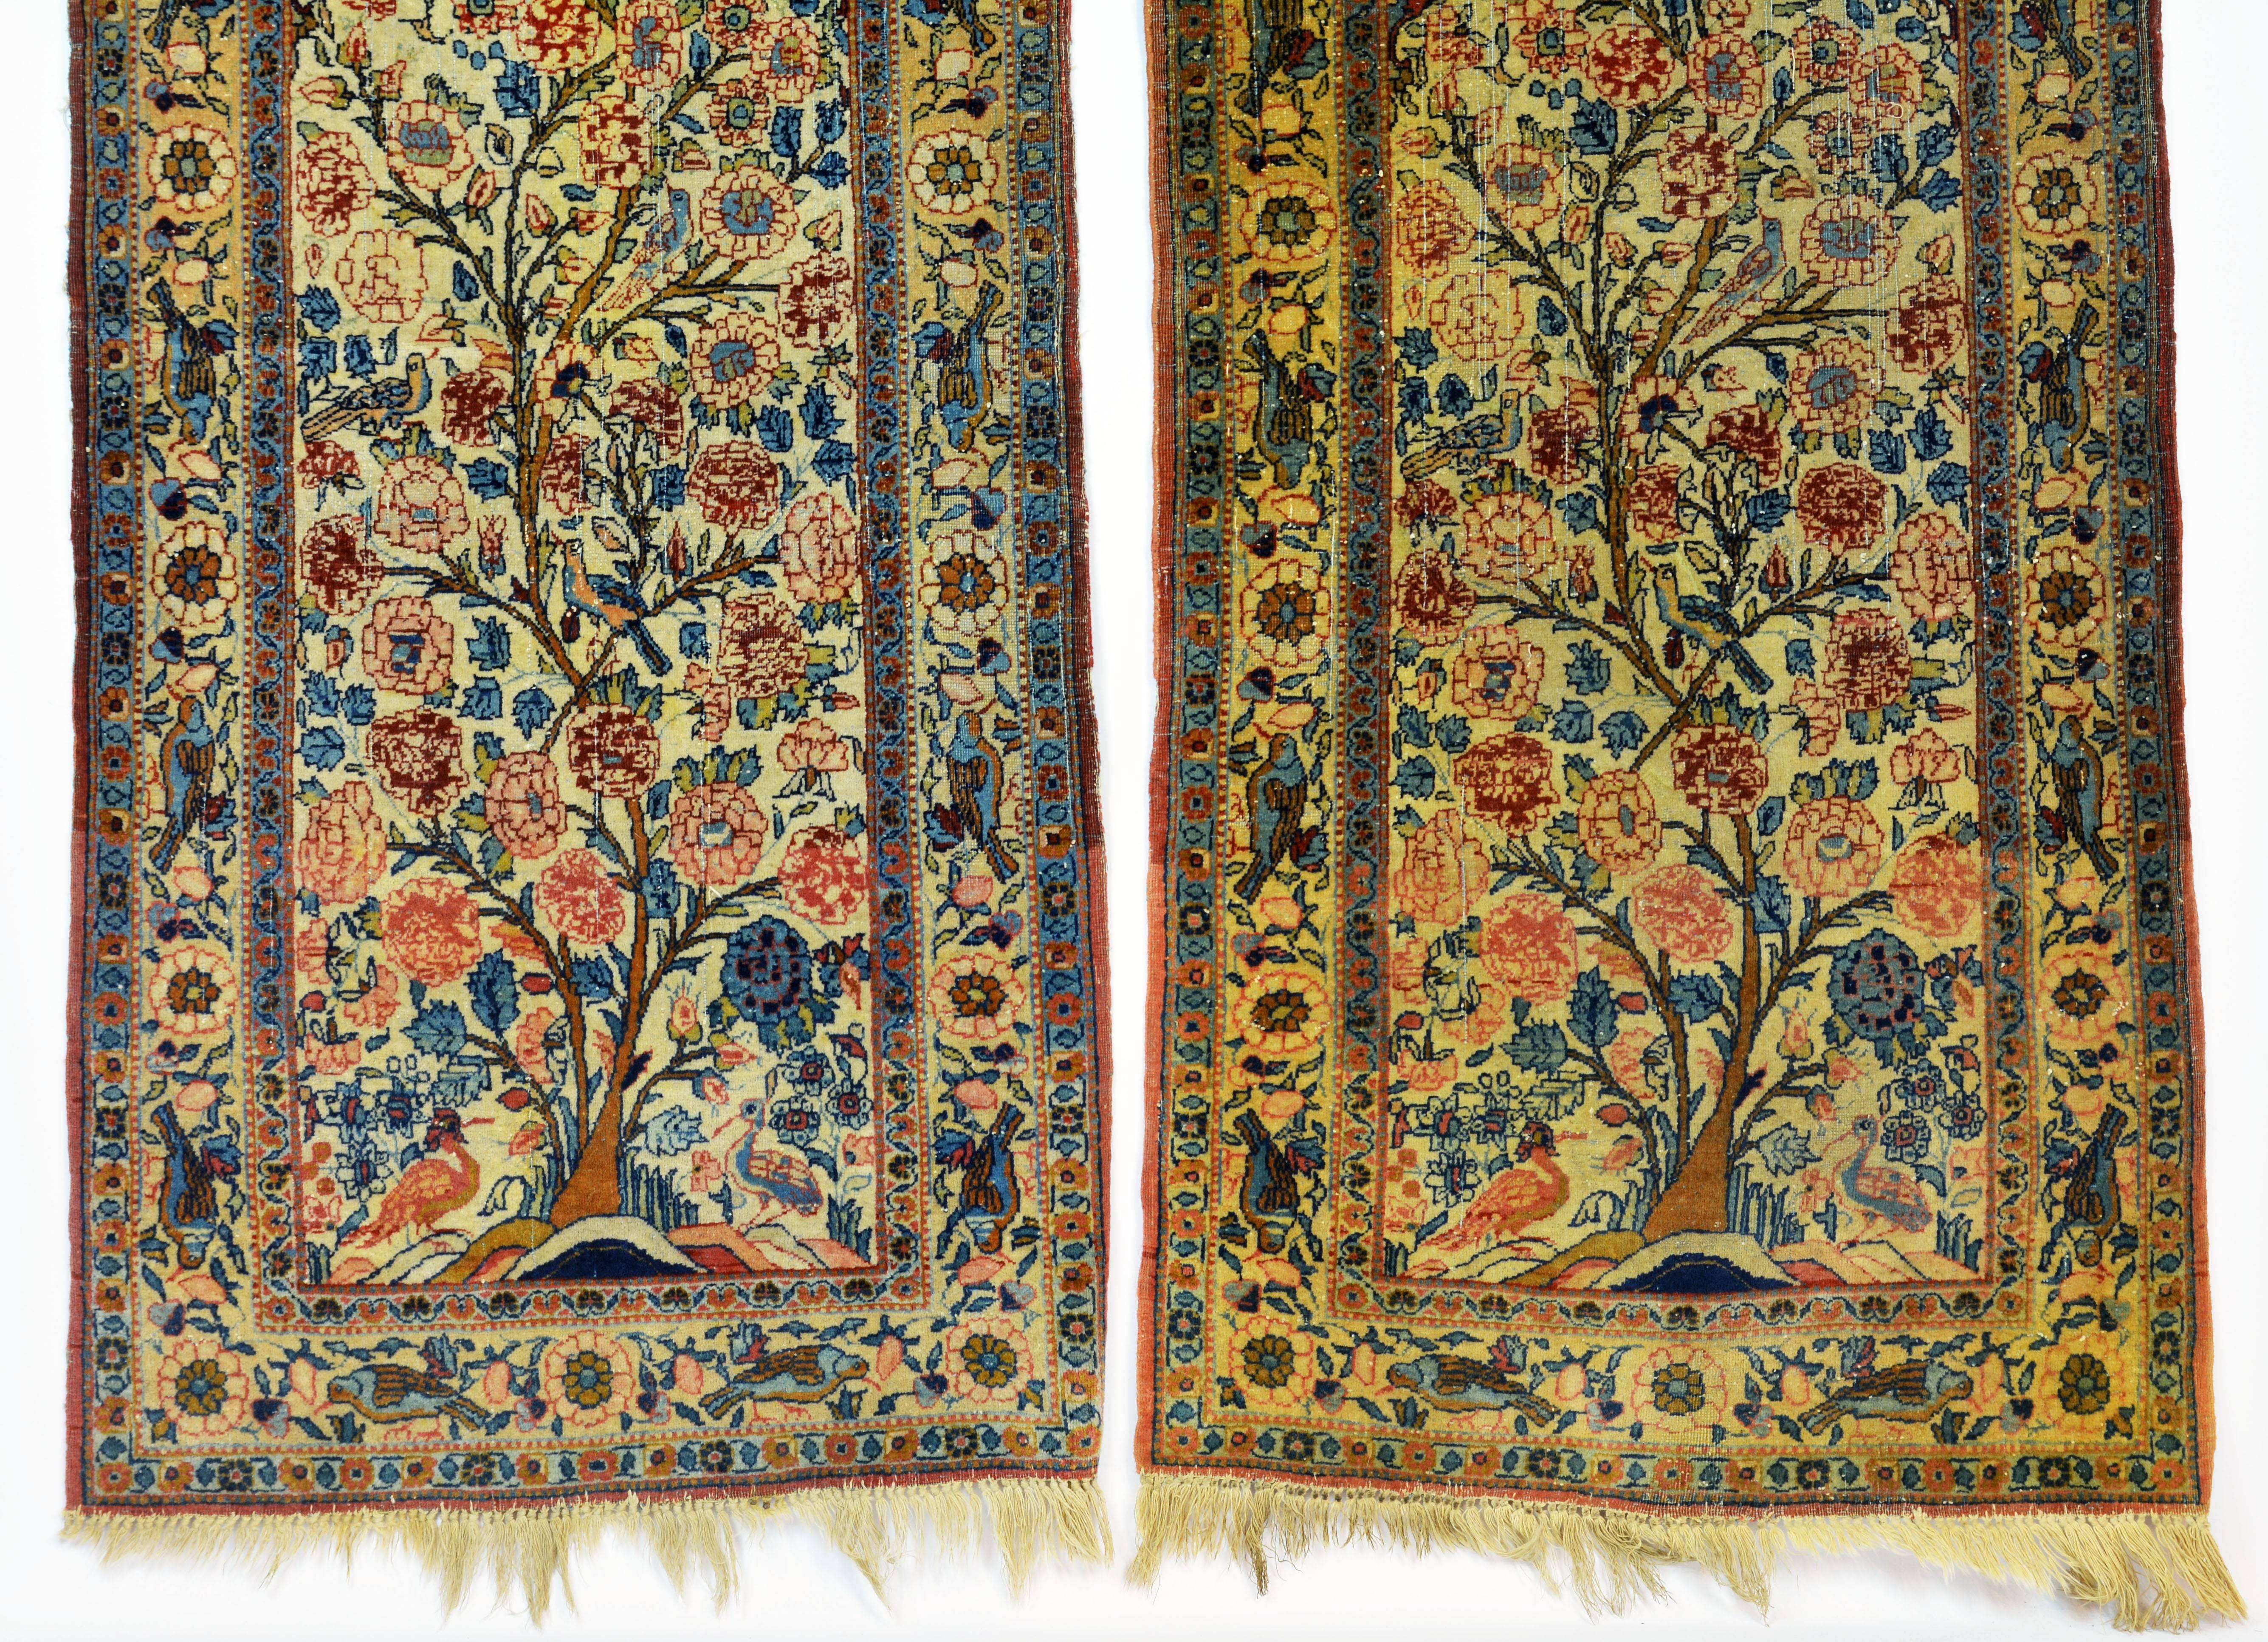 Not often do we find a pair of rugs. These Persian Lavar Kerman prayer rugs of the early or mid-20th century feature densely woven 'tree of Life' motif with flowers and birds in beautiful subdued blue, red and rose colors. The borders feature birds